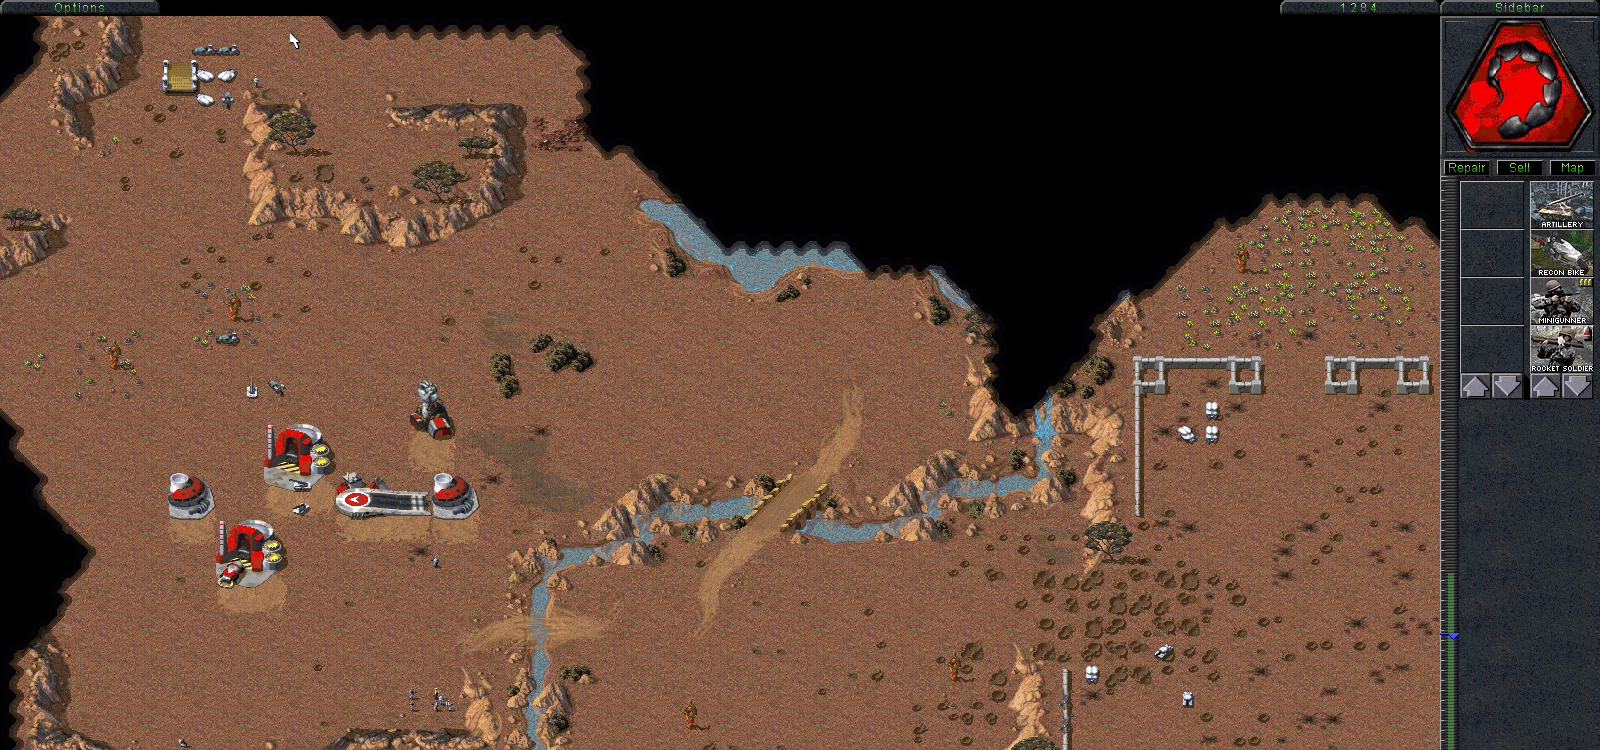 command__conquer-2014-10-09-20_36_15.png.acb46c60294e08467c87dcd47f72bf53.png